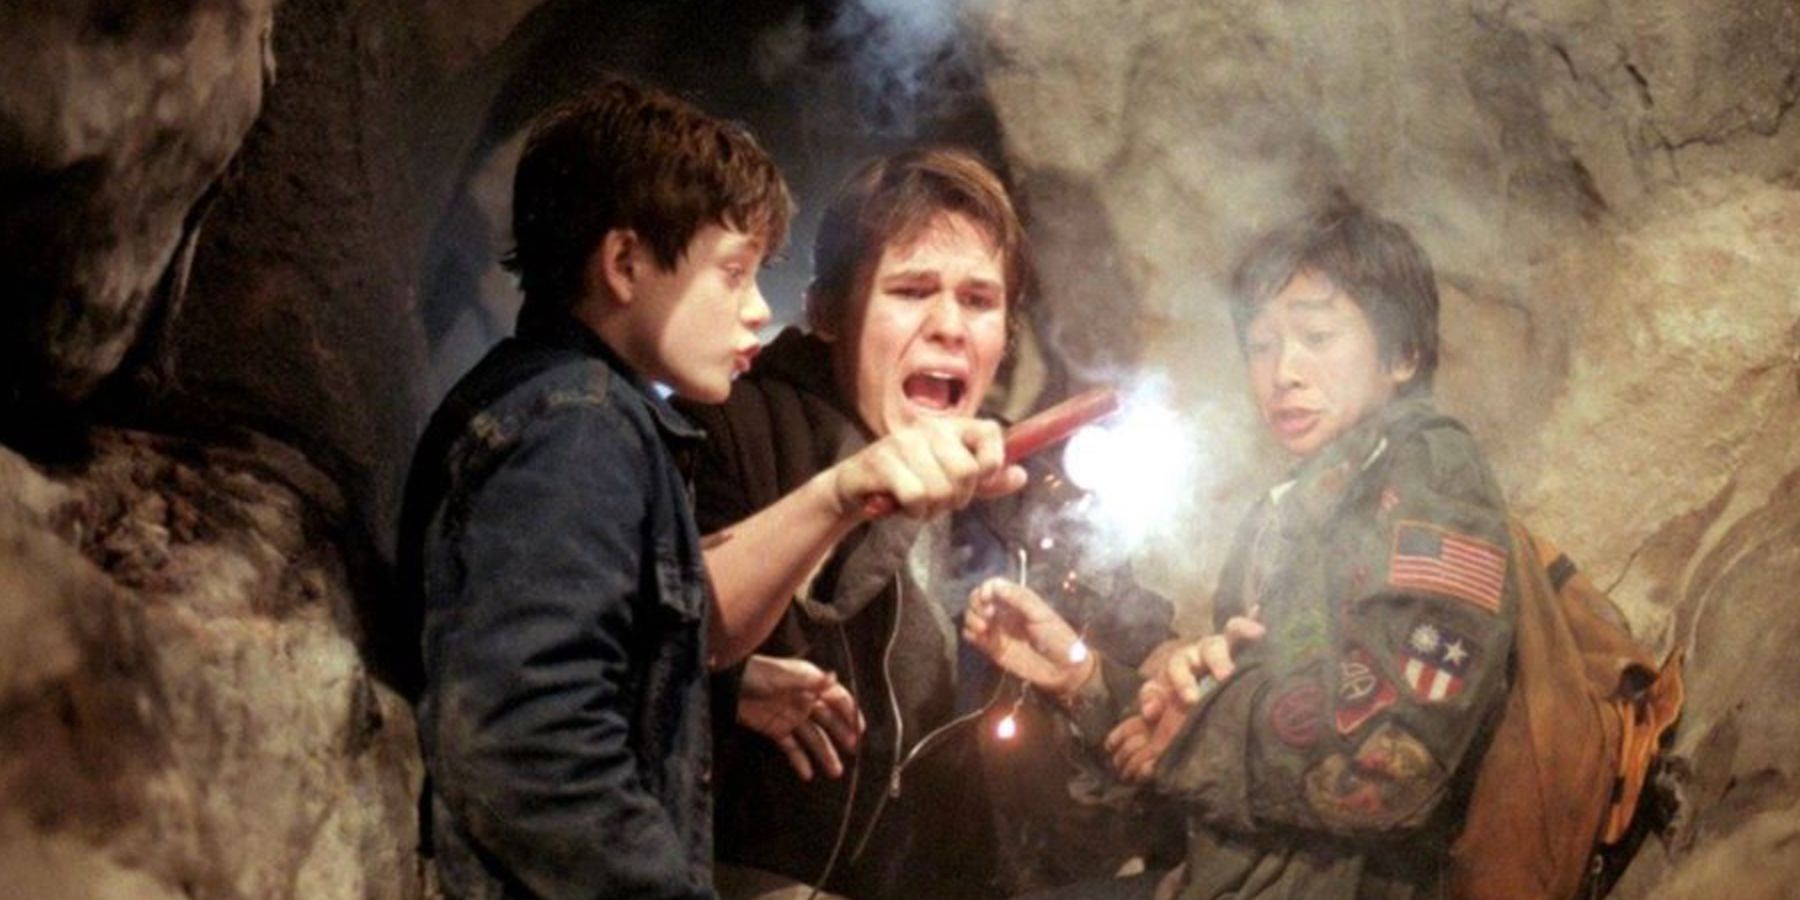 Mikey, Brand, and Data with an explosive candle in The Goonies